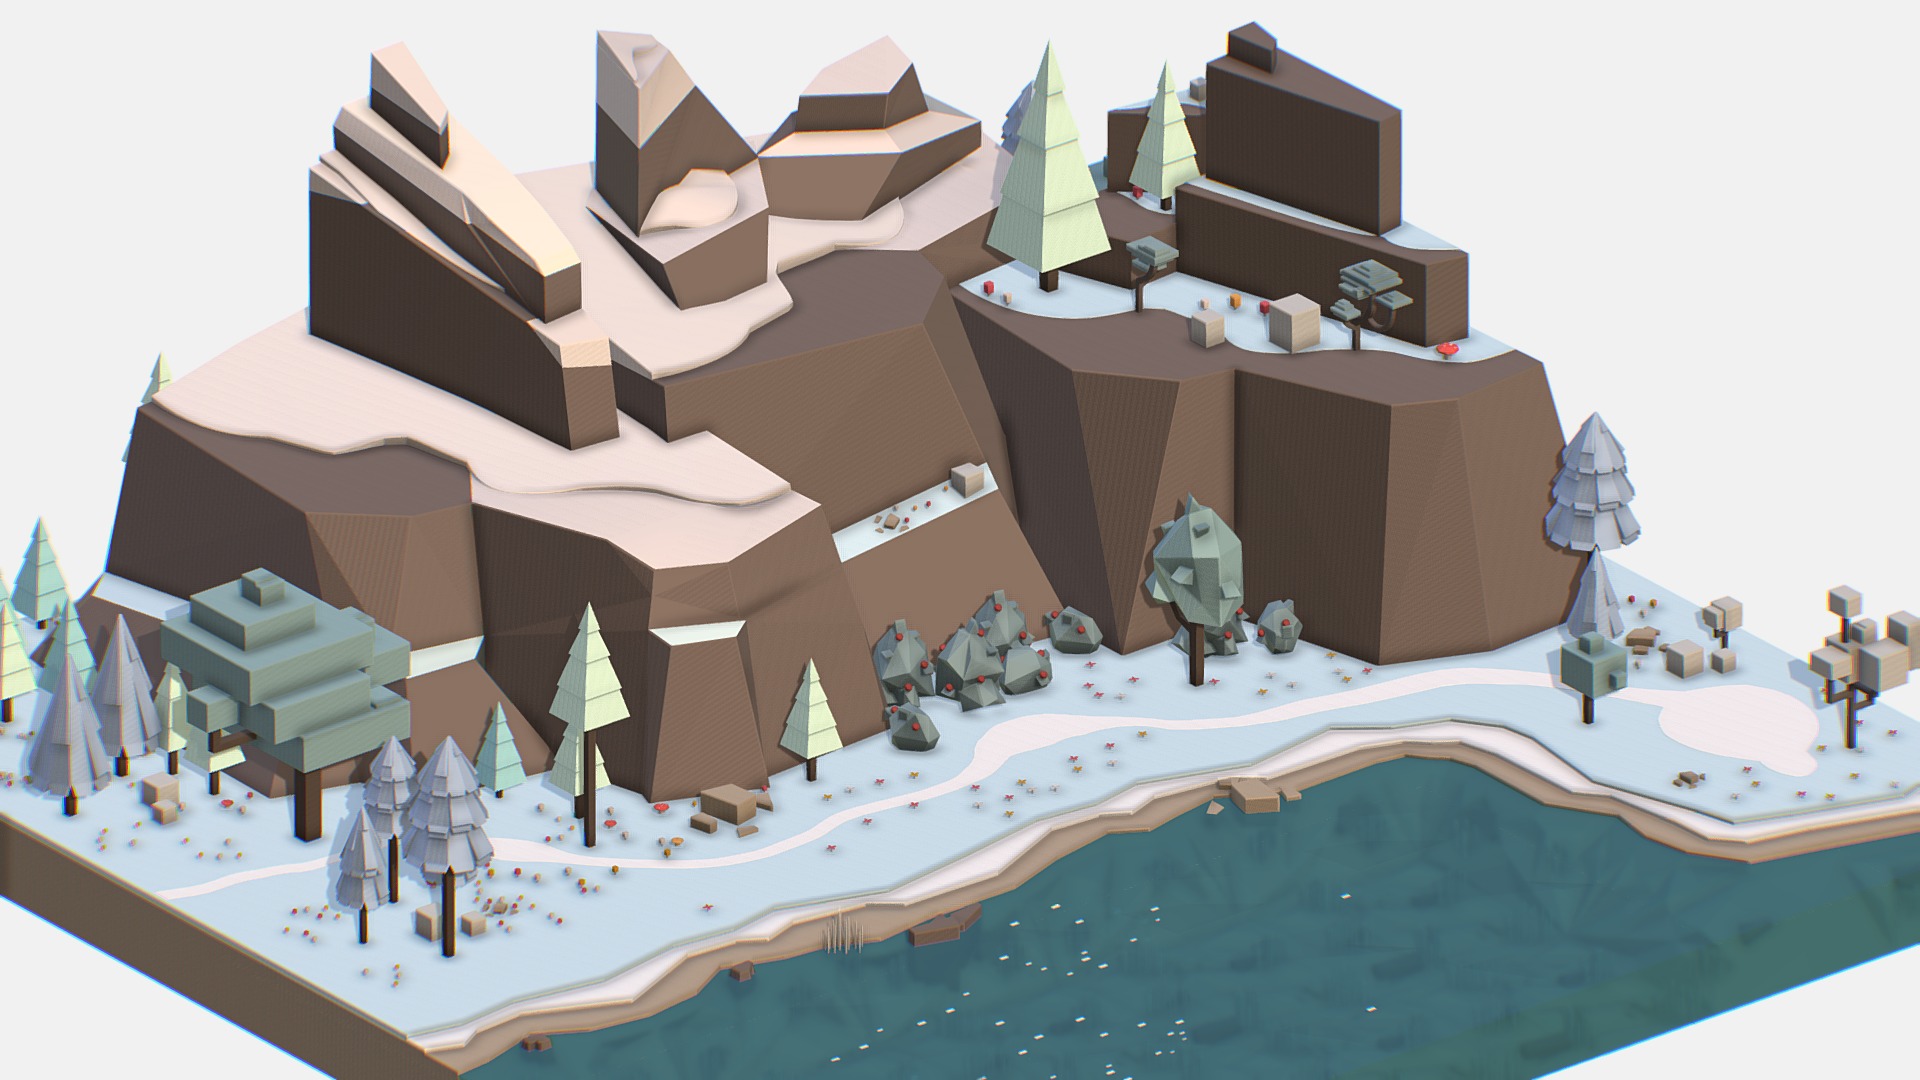 3D model Isometric style lake winter mountain landscape - This is a 3D model of the Isometric style lake winter mountain landscape. The 3D model is about a toy house made of building blocks.